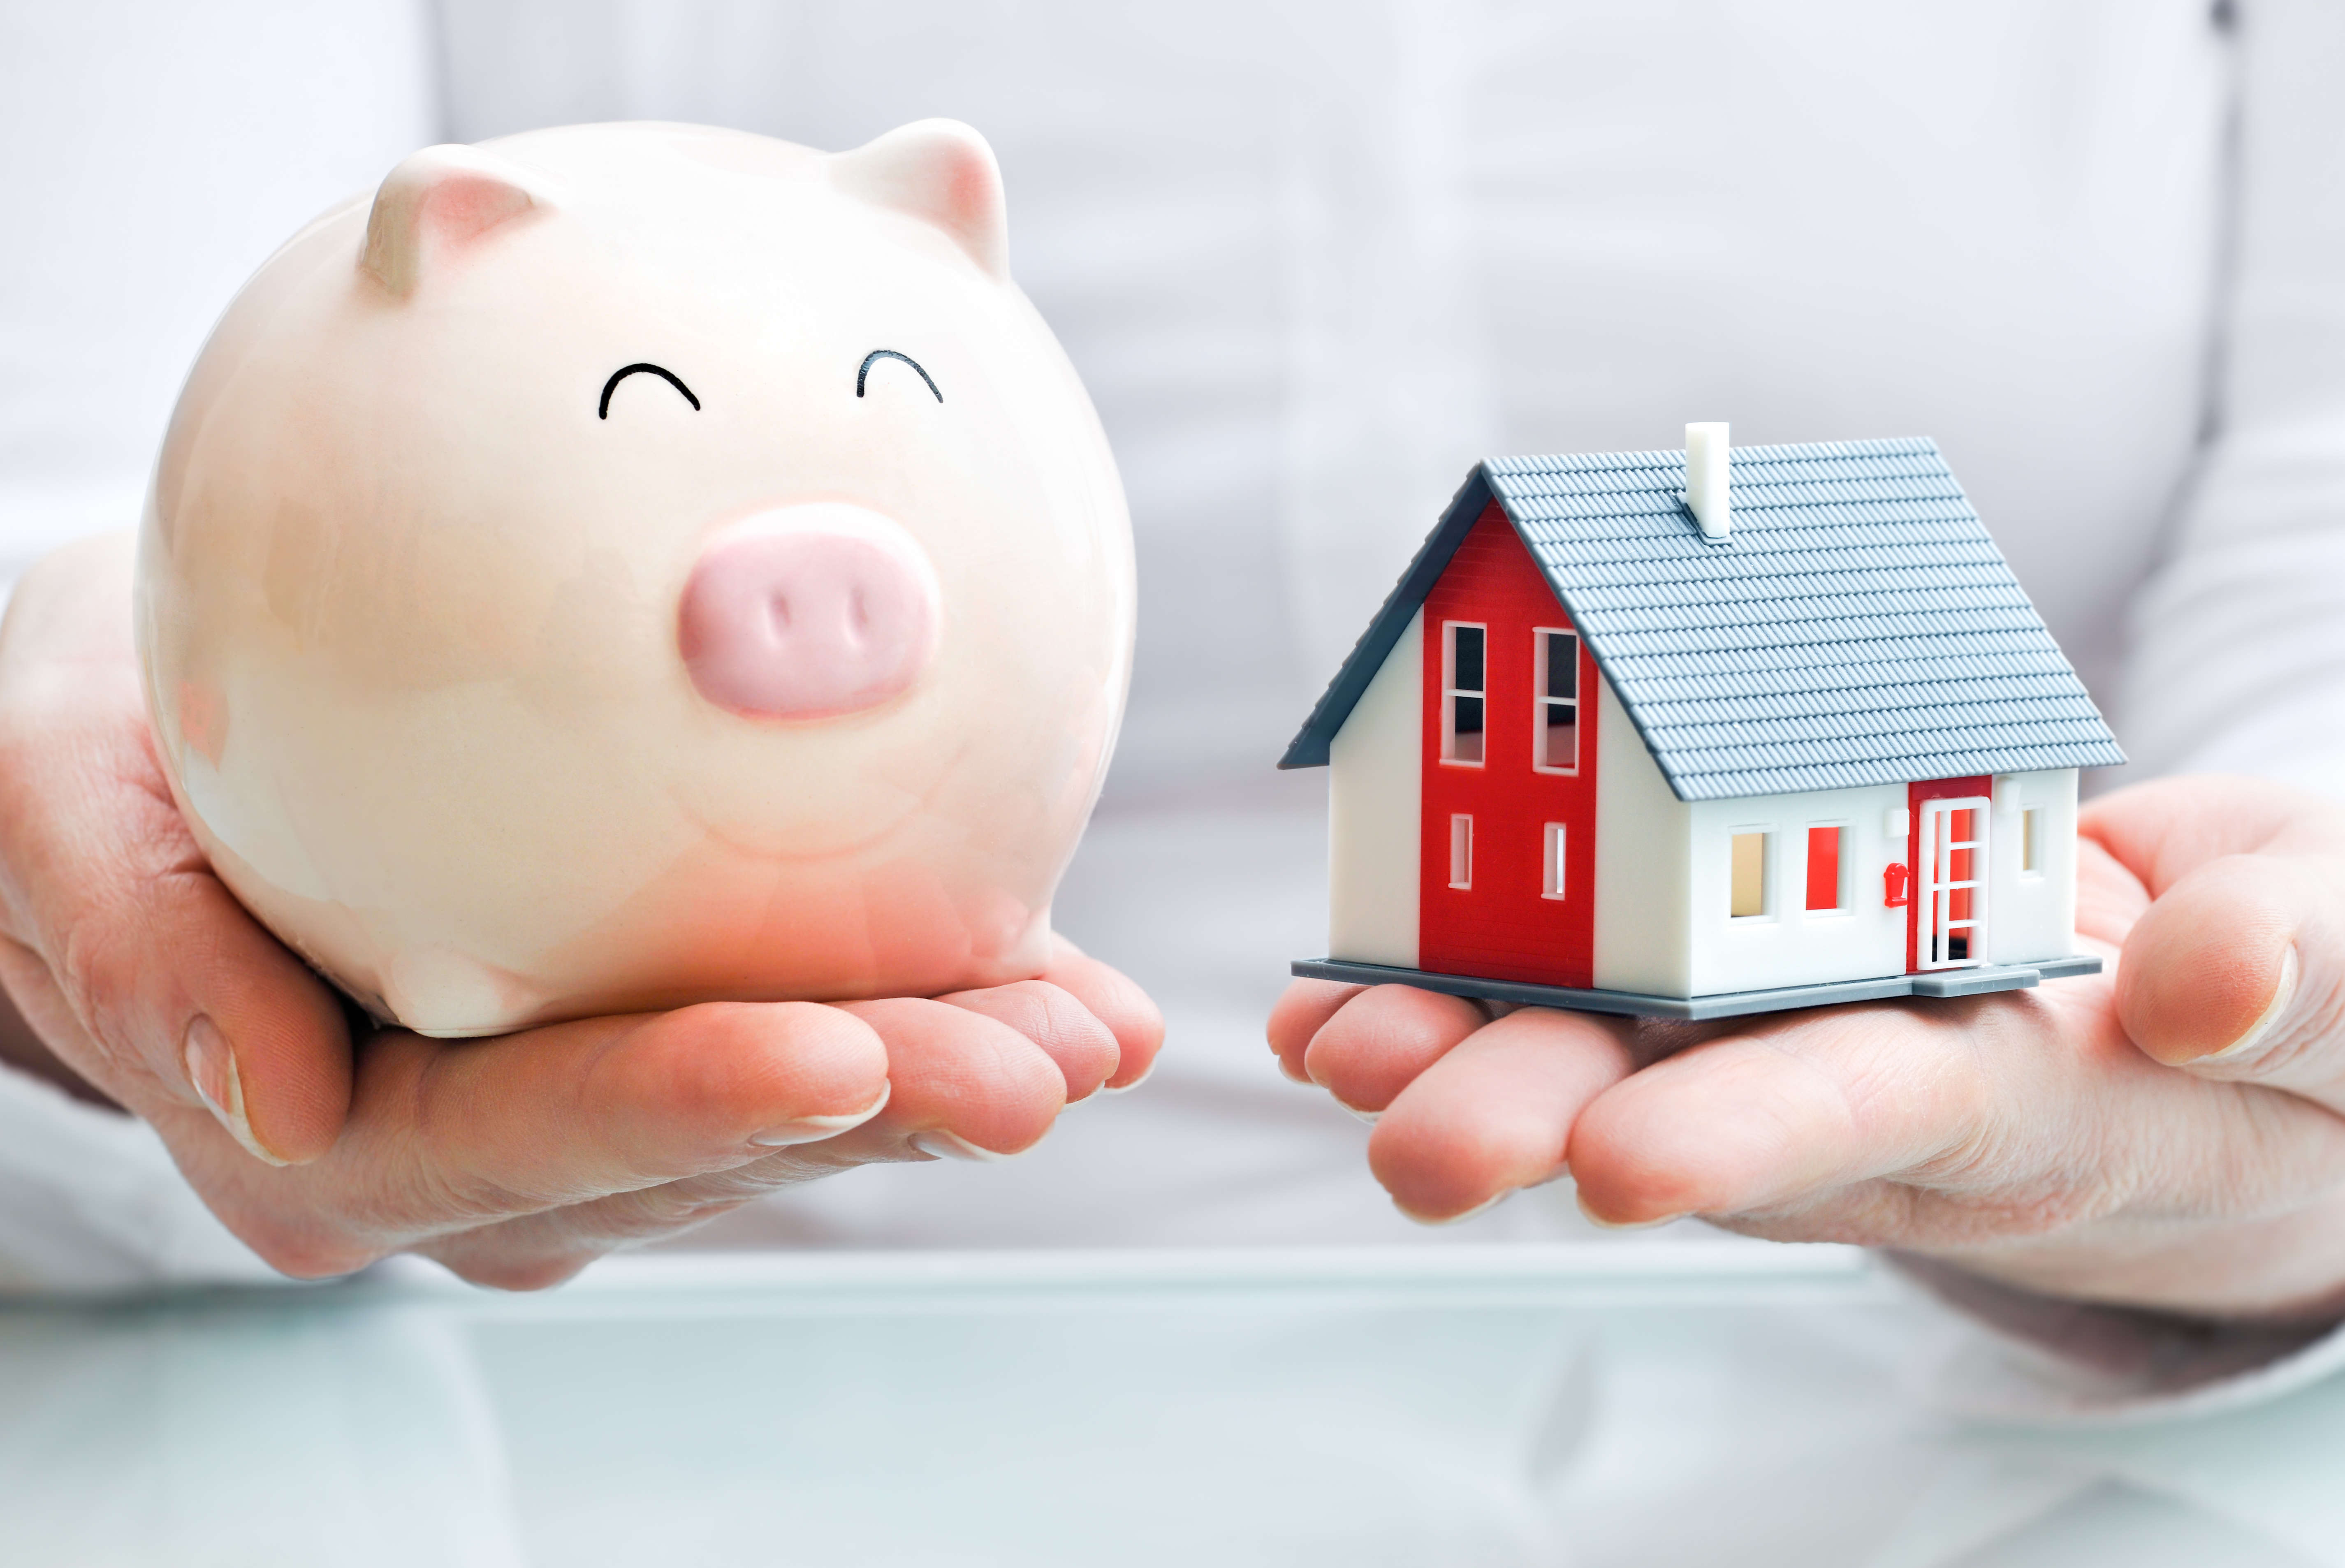 Hands holding a piggy bank and a house model. Housing industry mortgage plan and residential tax saving strategy